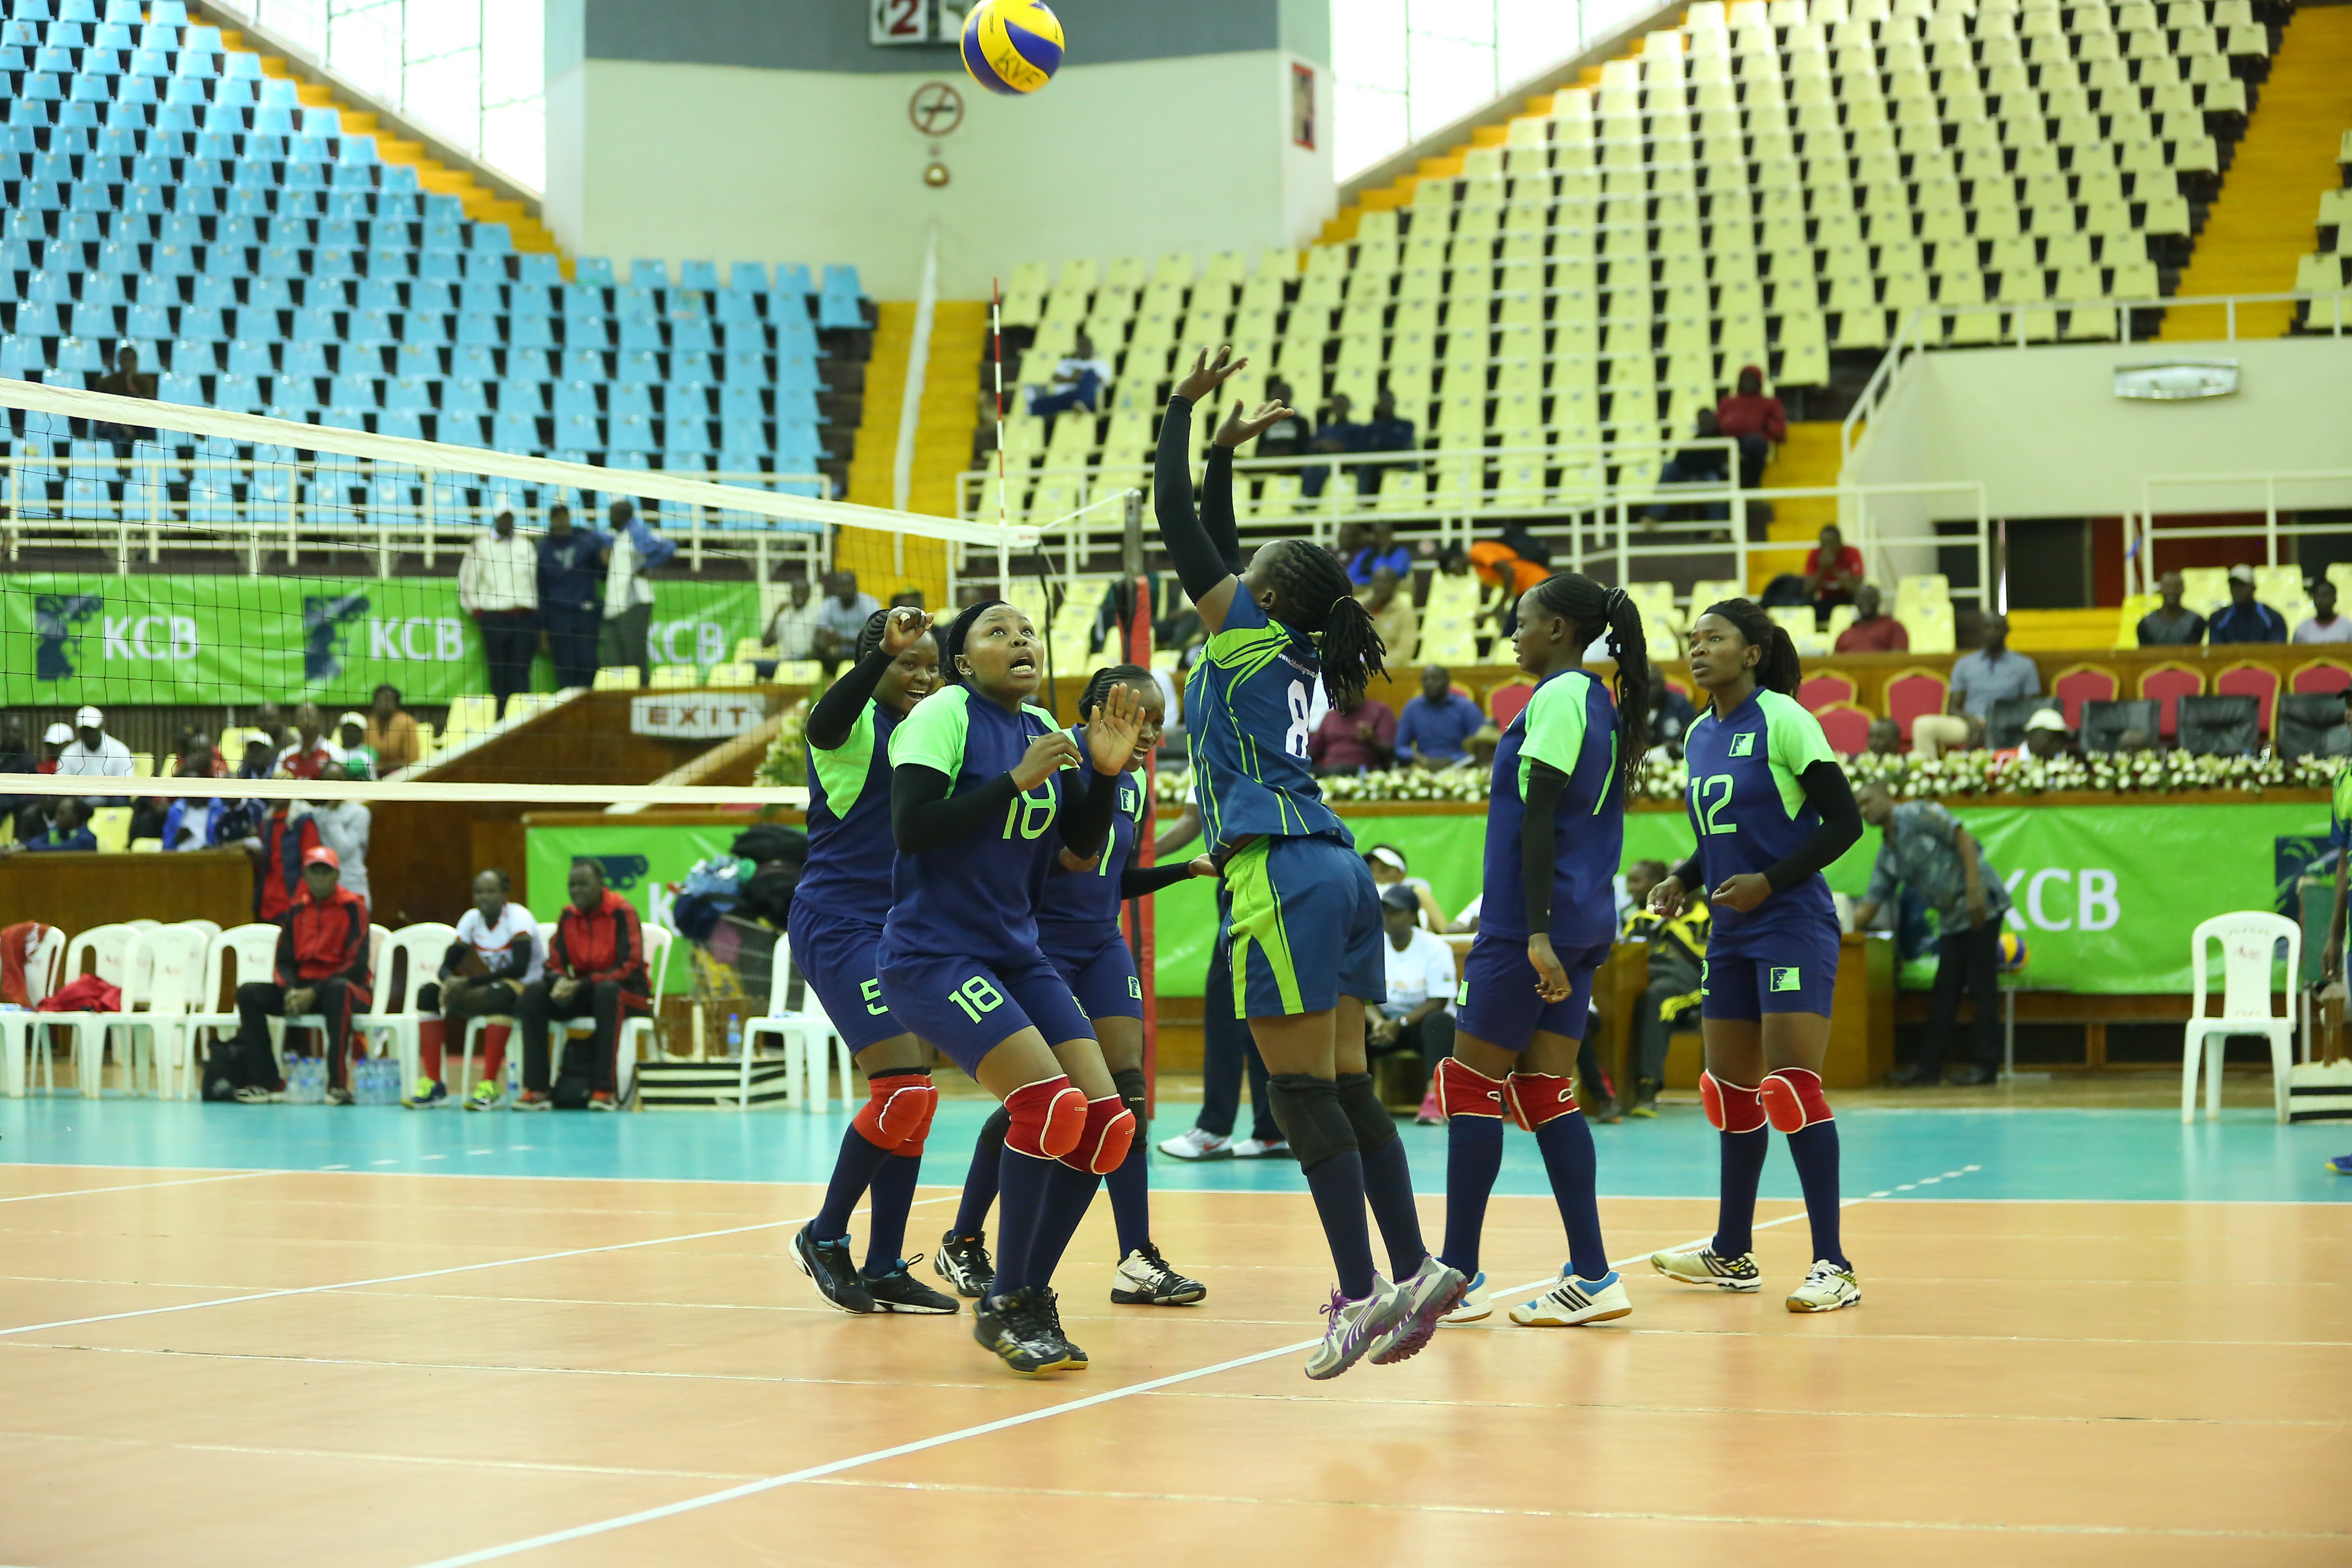 KCB Ladies Gears Up for Crunch KVF National Volleyball Play Offs.